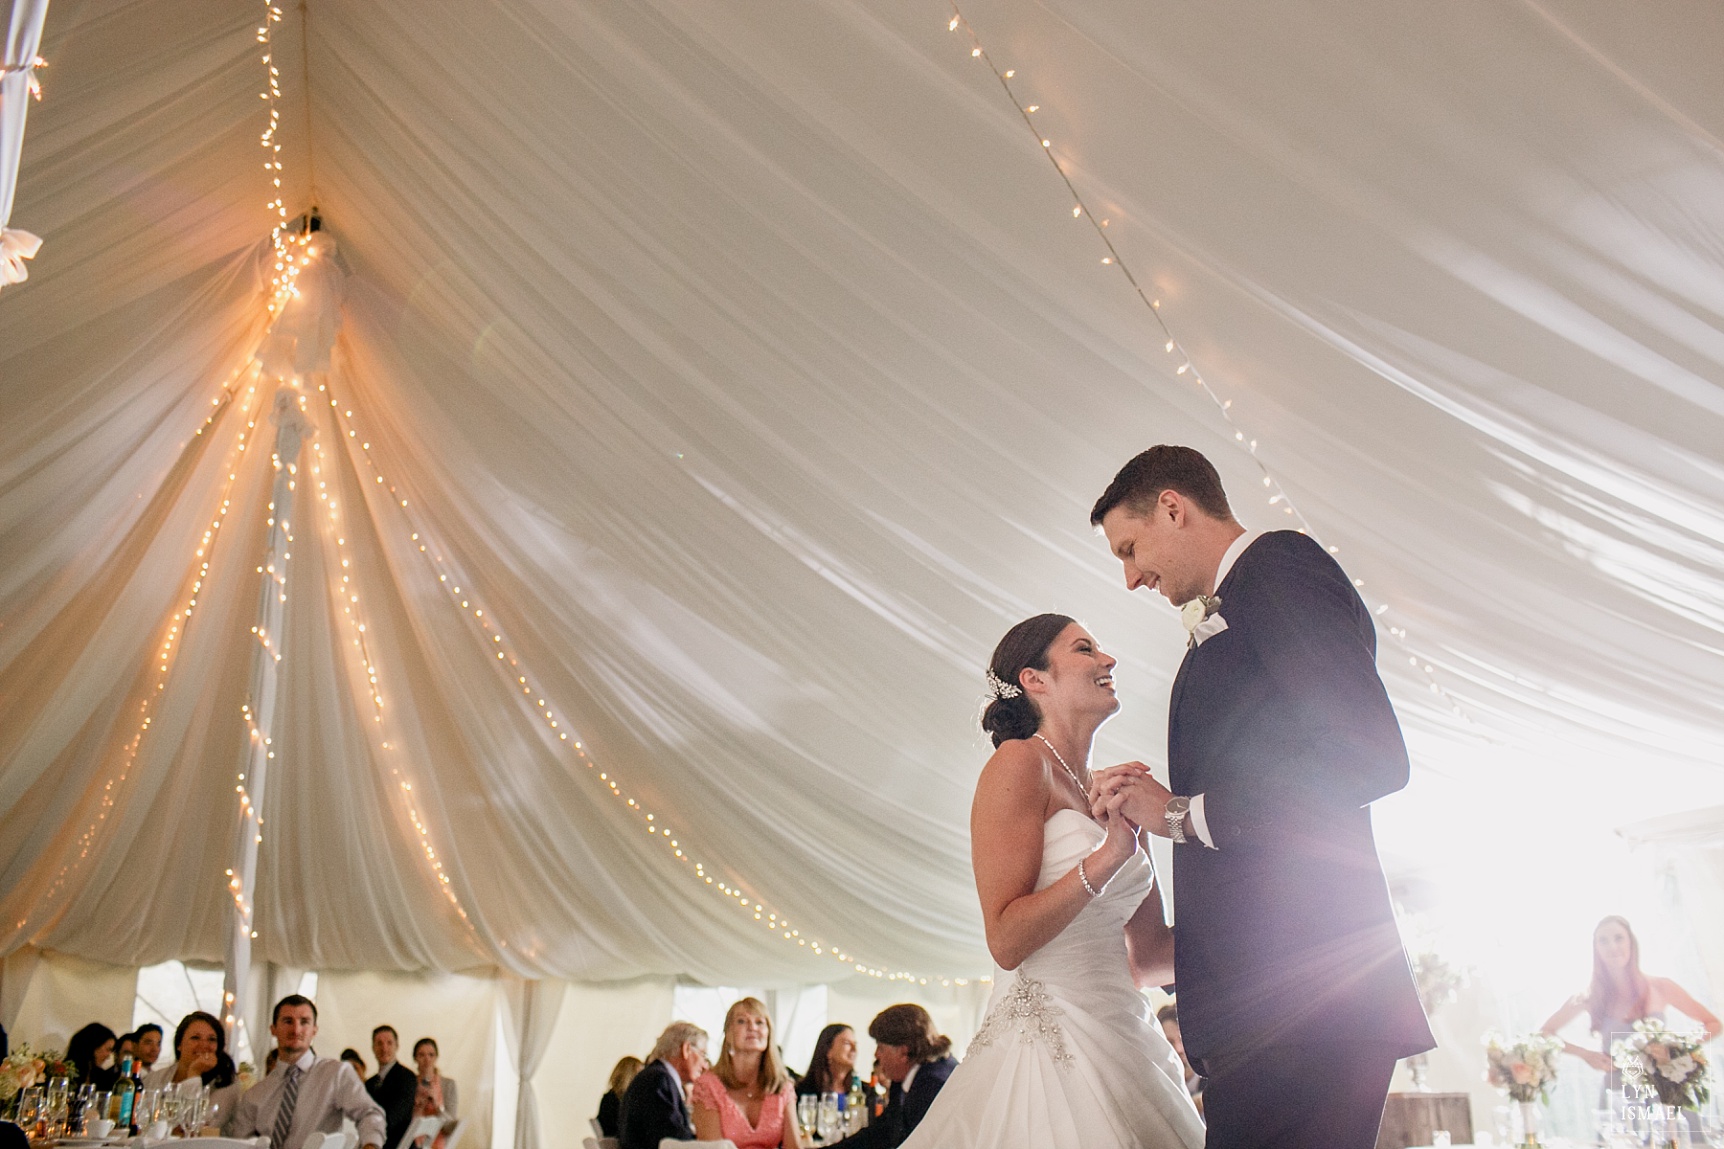 The first dance inside the Marquis tent at Knollwood Golf Club.